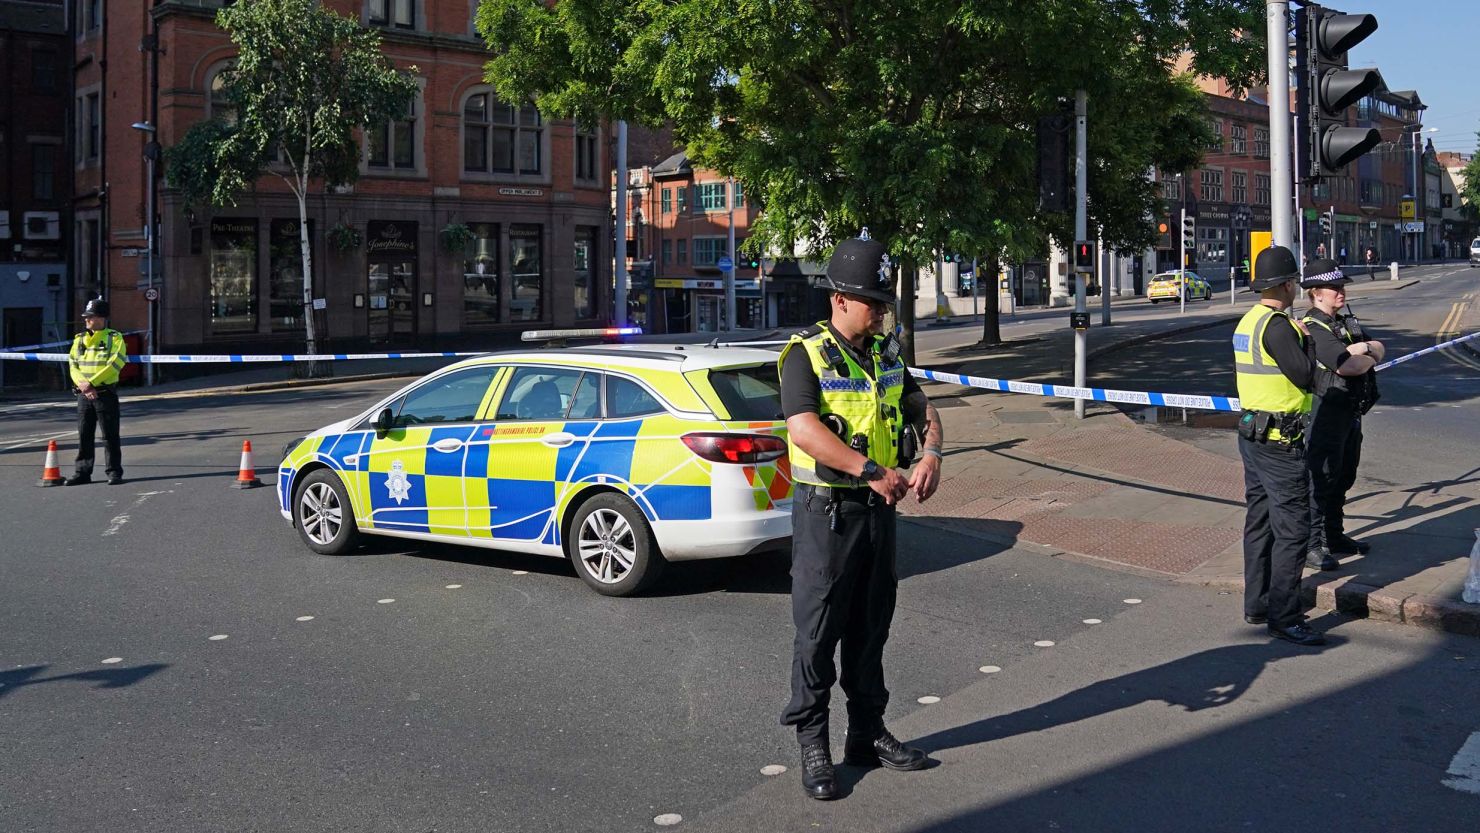 Police officers line a street in Nottingham on Tuesday, where multiple road closures were in place as authorities deal with what they called a major incident.